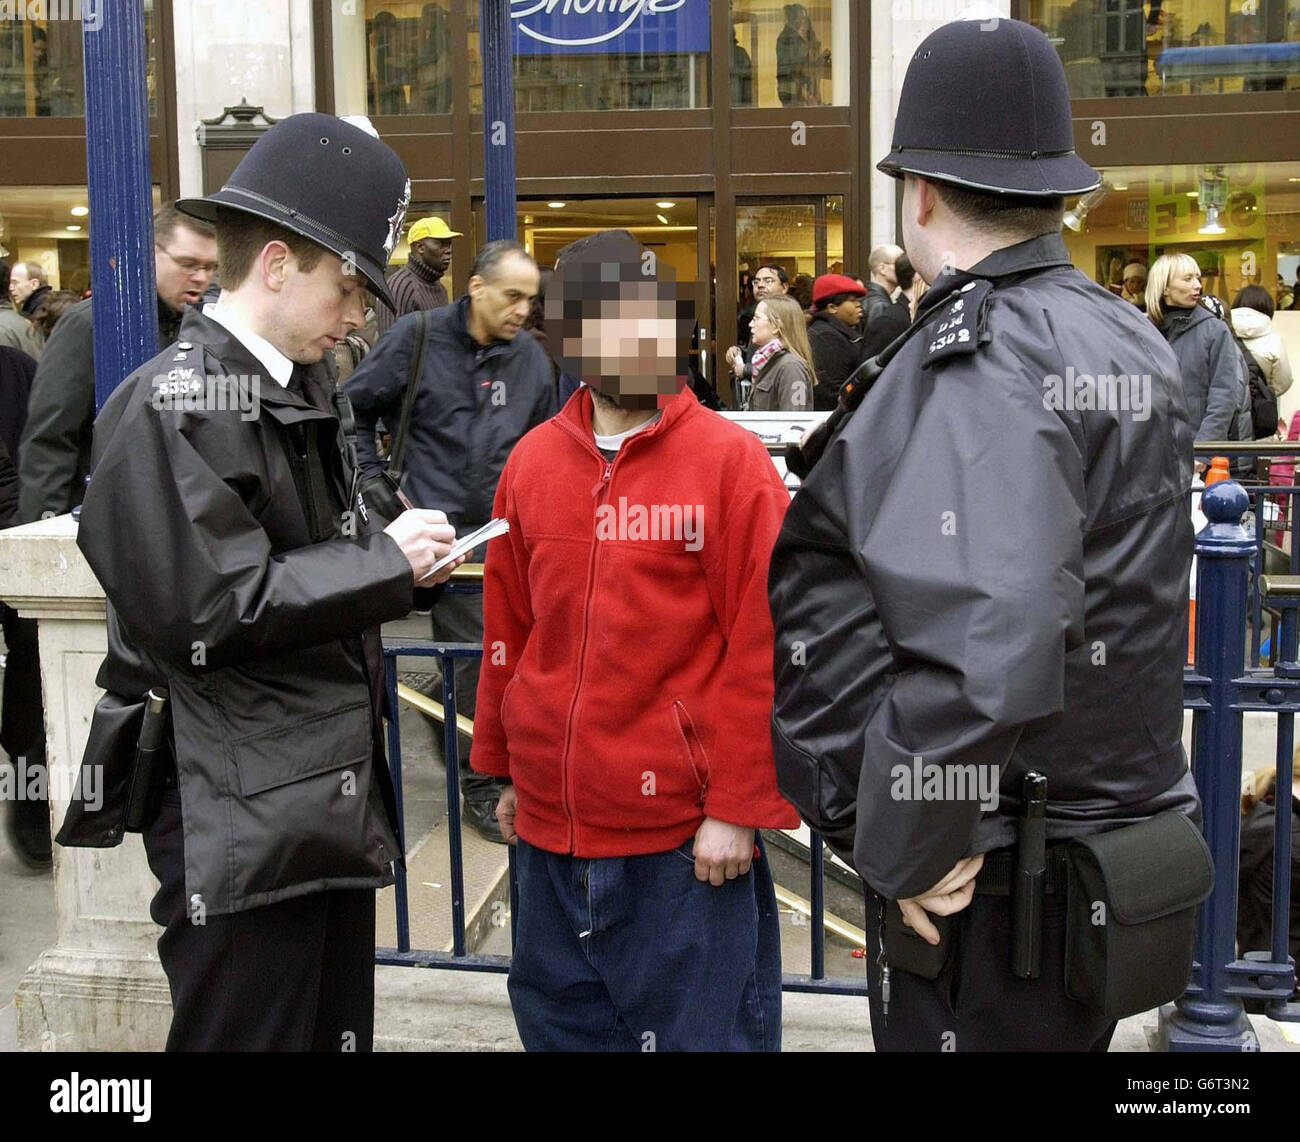 A man is questioned by police who suspect him of begging in Oxford Circus. Fifteen people were arrested on the first night of a controversial drive to clear beggars off the streets of London's West End, organisers said. They were picked up as part of a 48-hour blitz by Westminster Council designed to disrupt and deter begging in the area. POLICE HAVE REQUESTED THAT THE MANS FACE BE PIXELLATED. Stock Photo